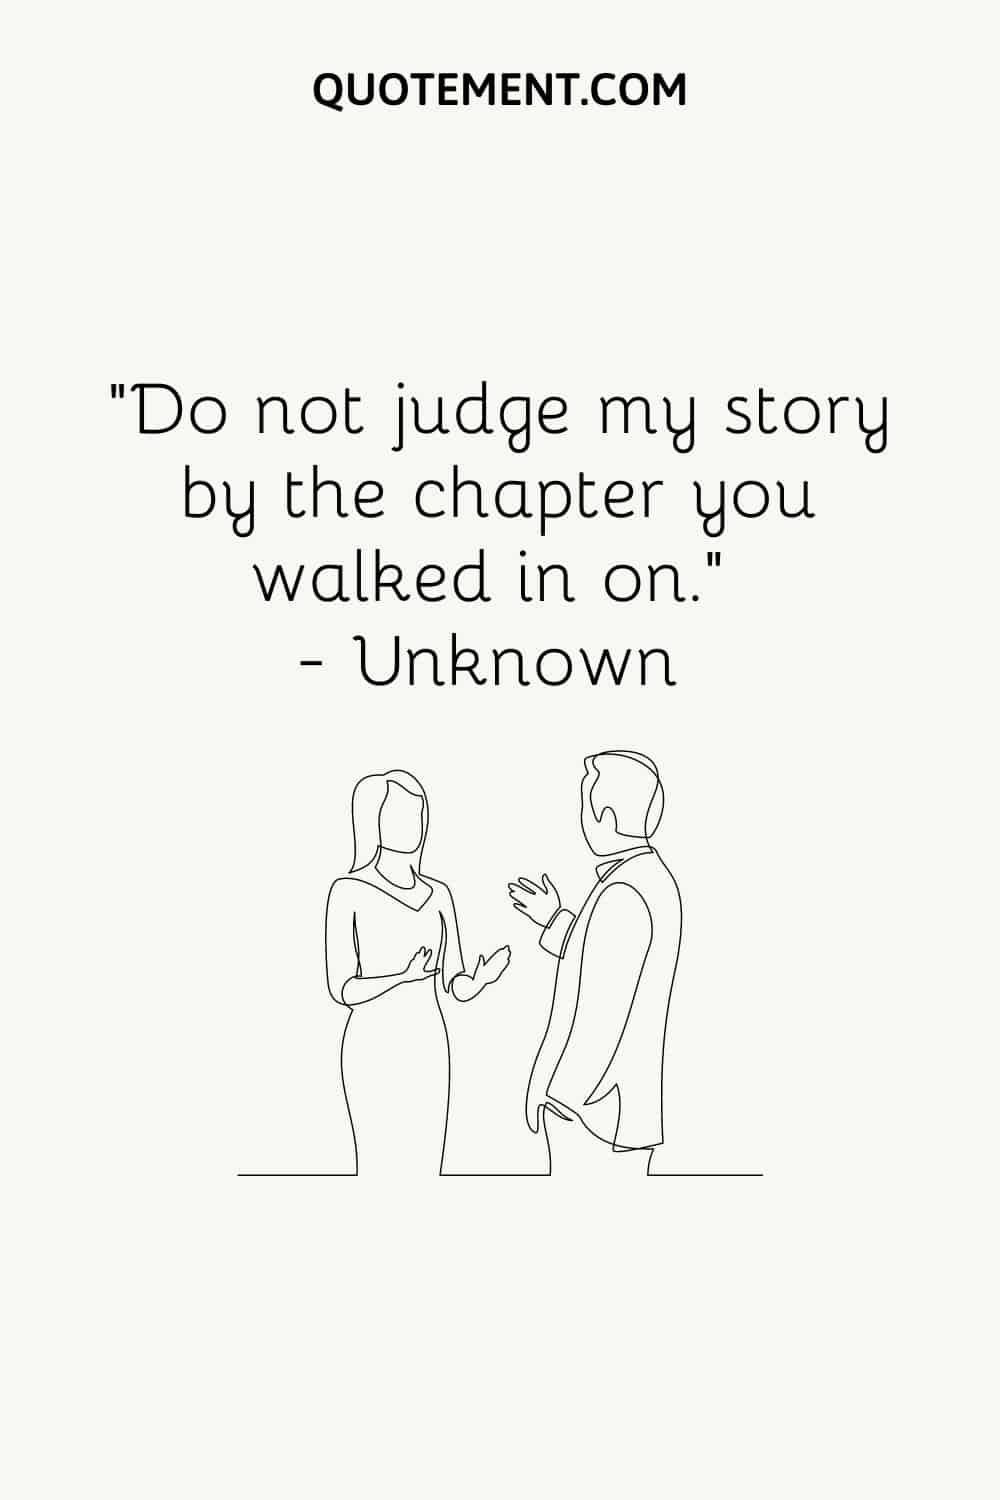 “Do not judge my story by the chapter you walked in on.” — Unknown